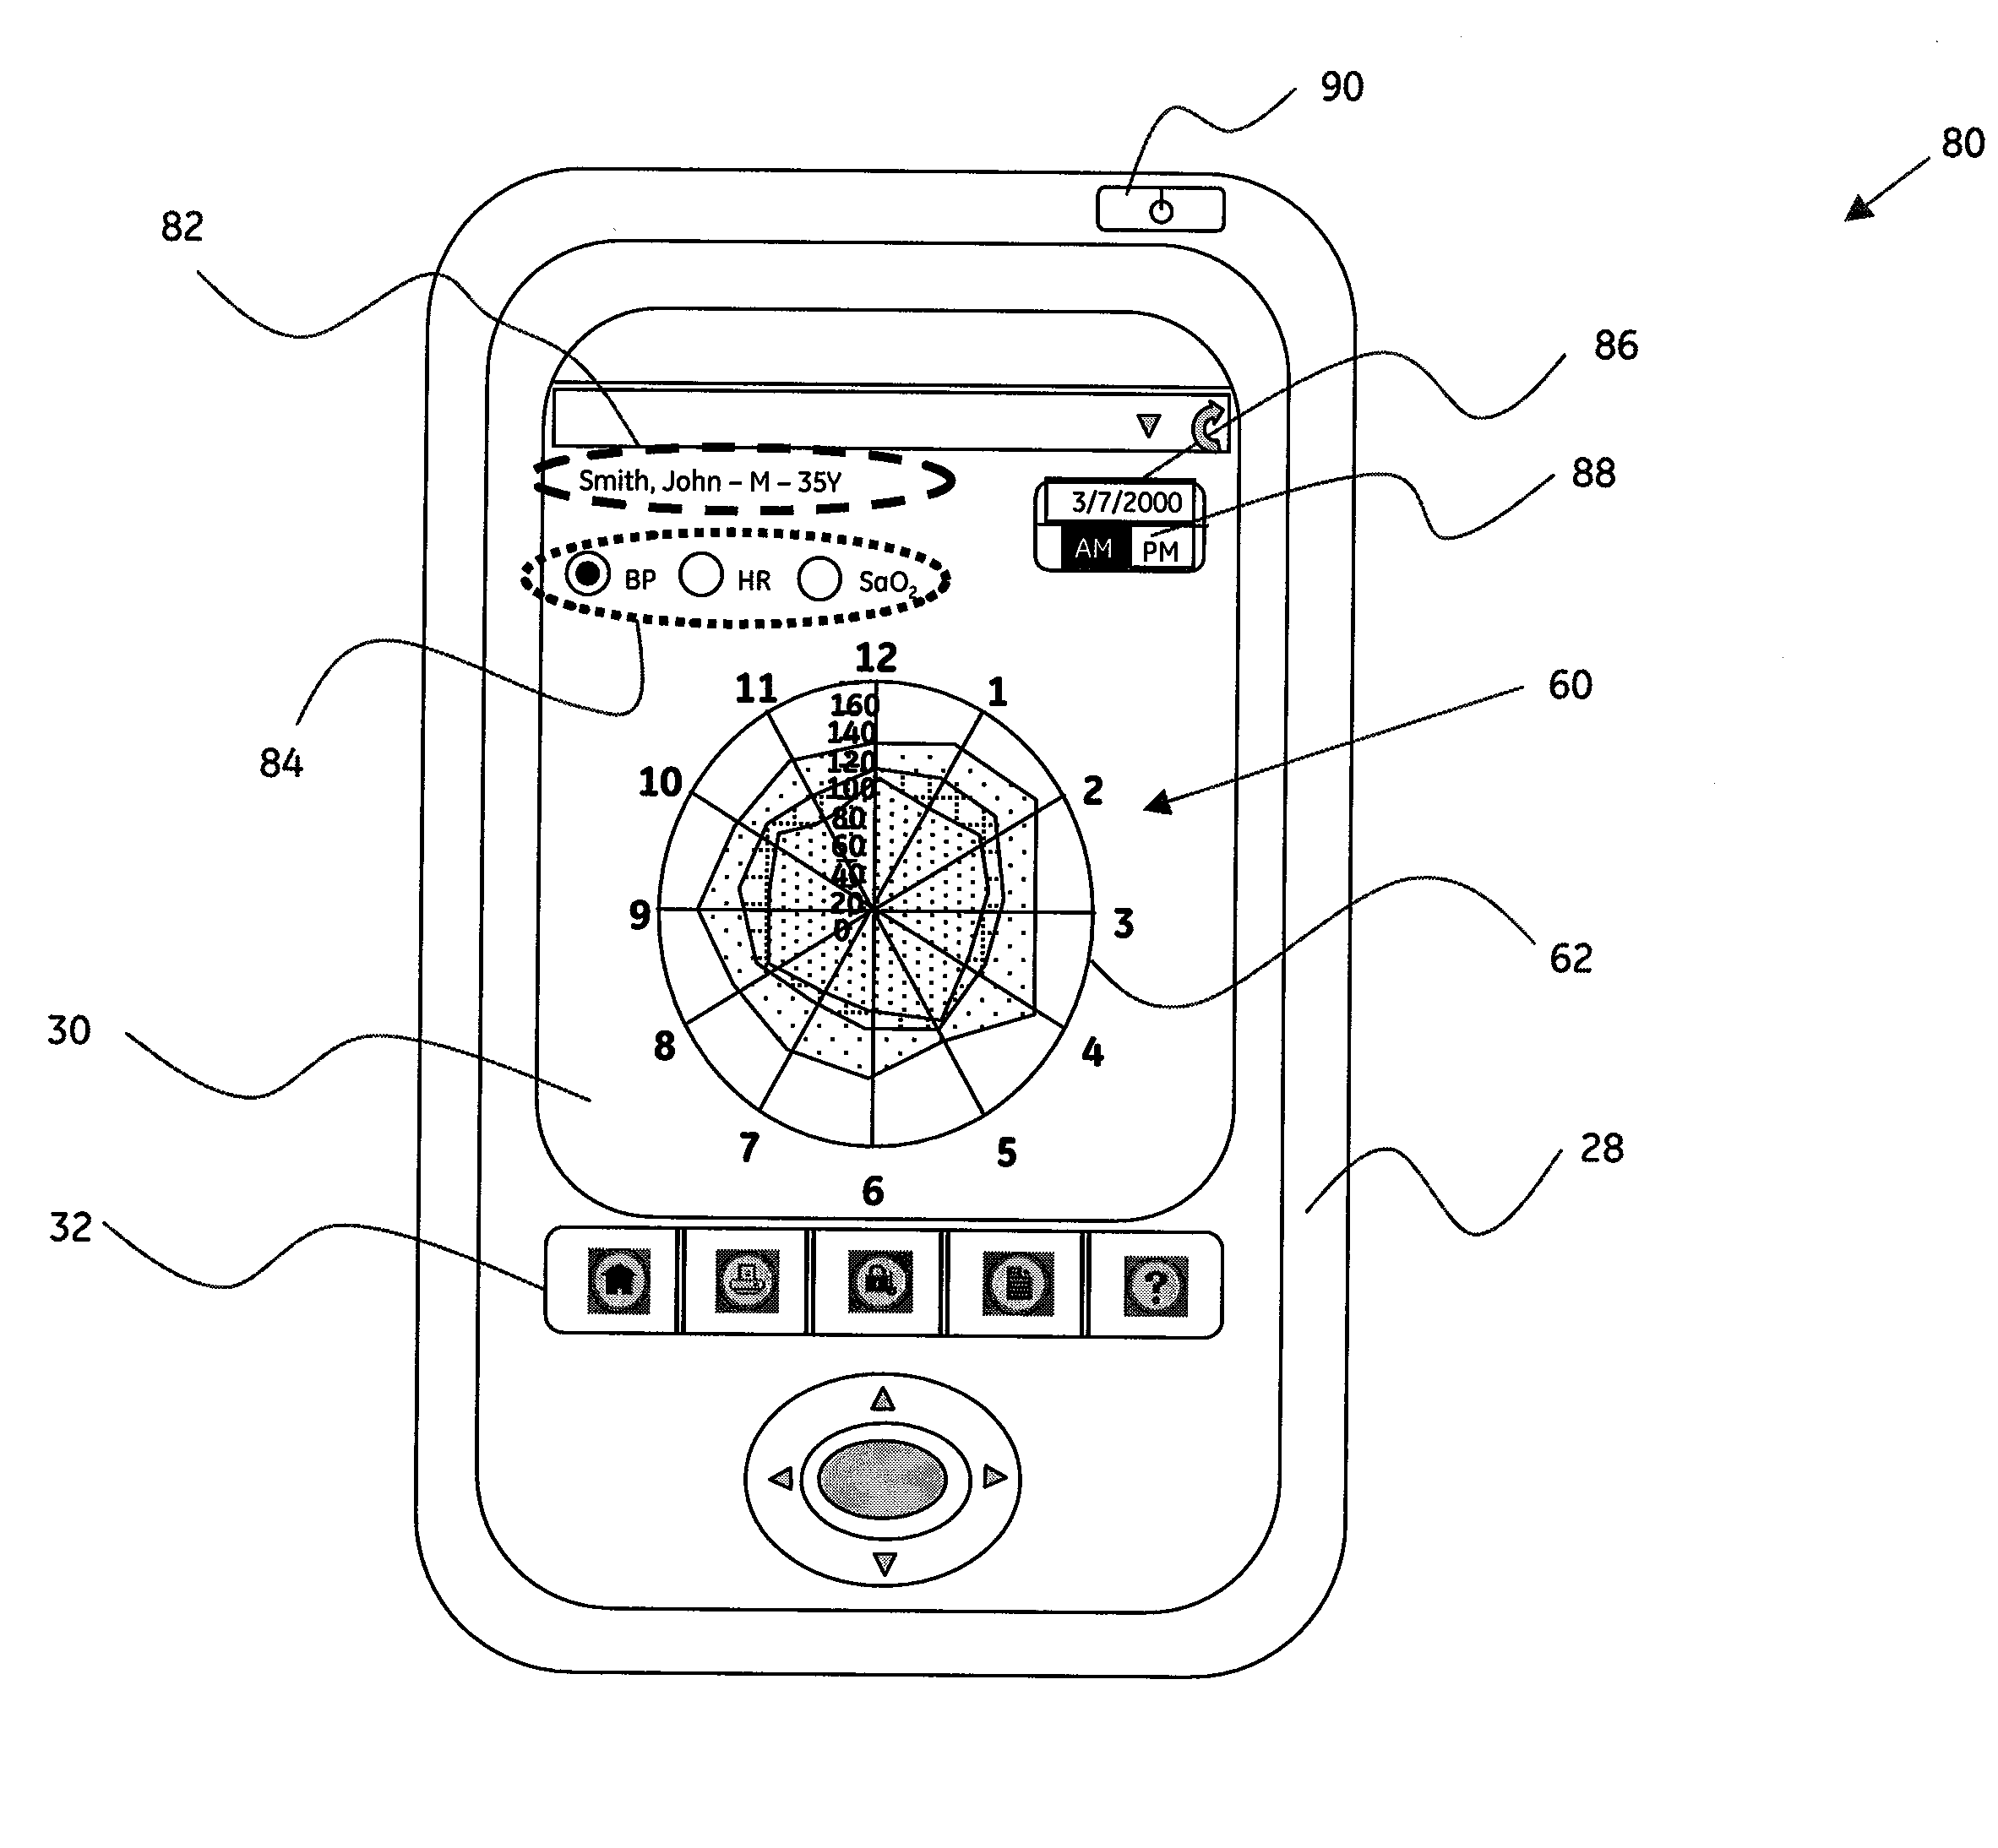 Method and system for enhanced display of temporal data on portable devices